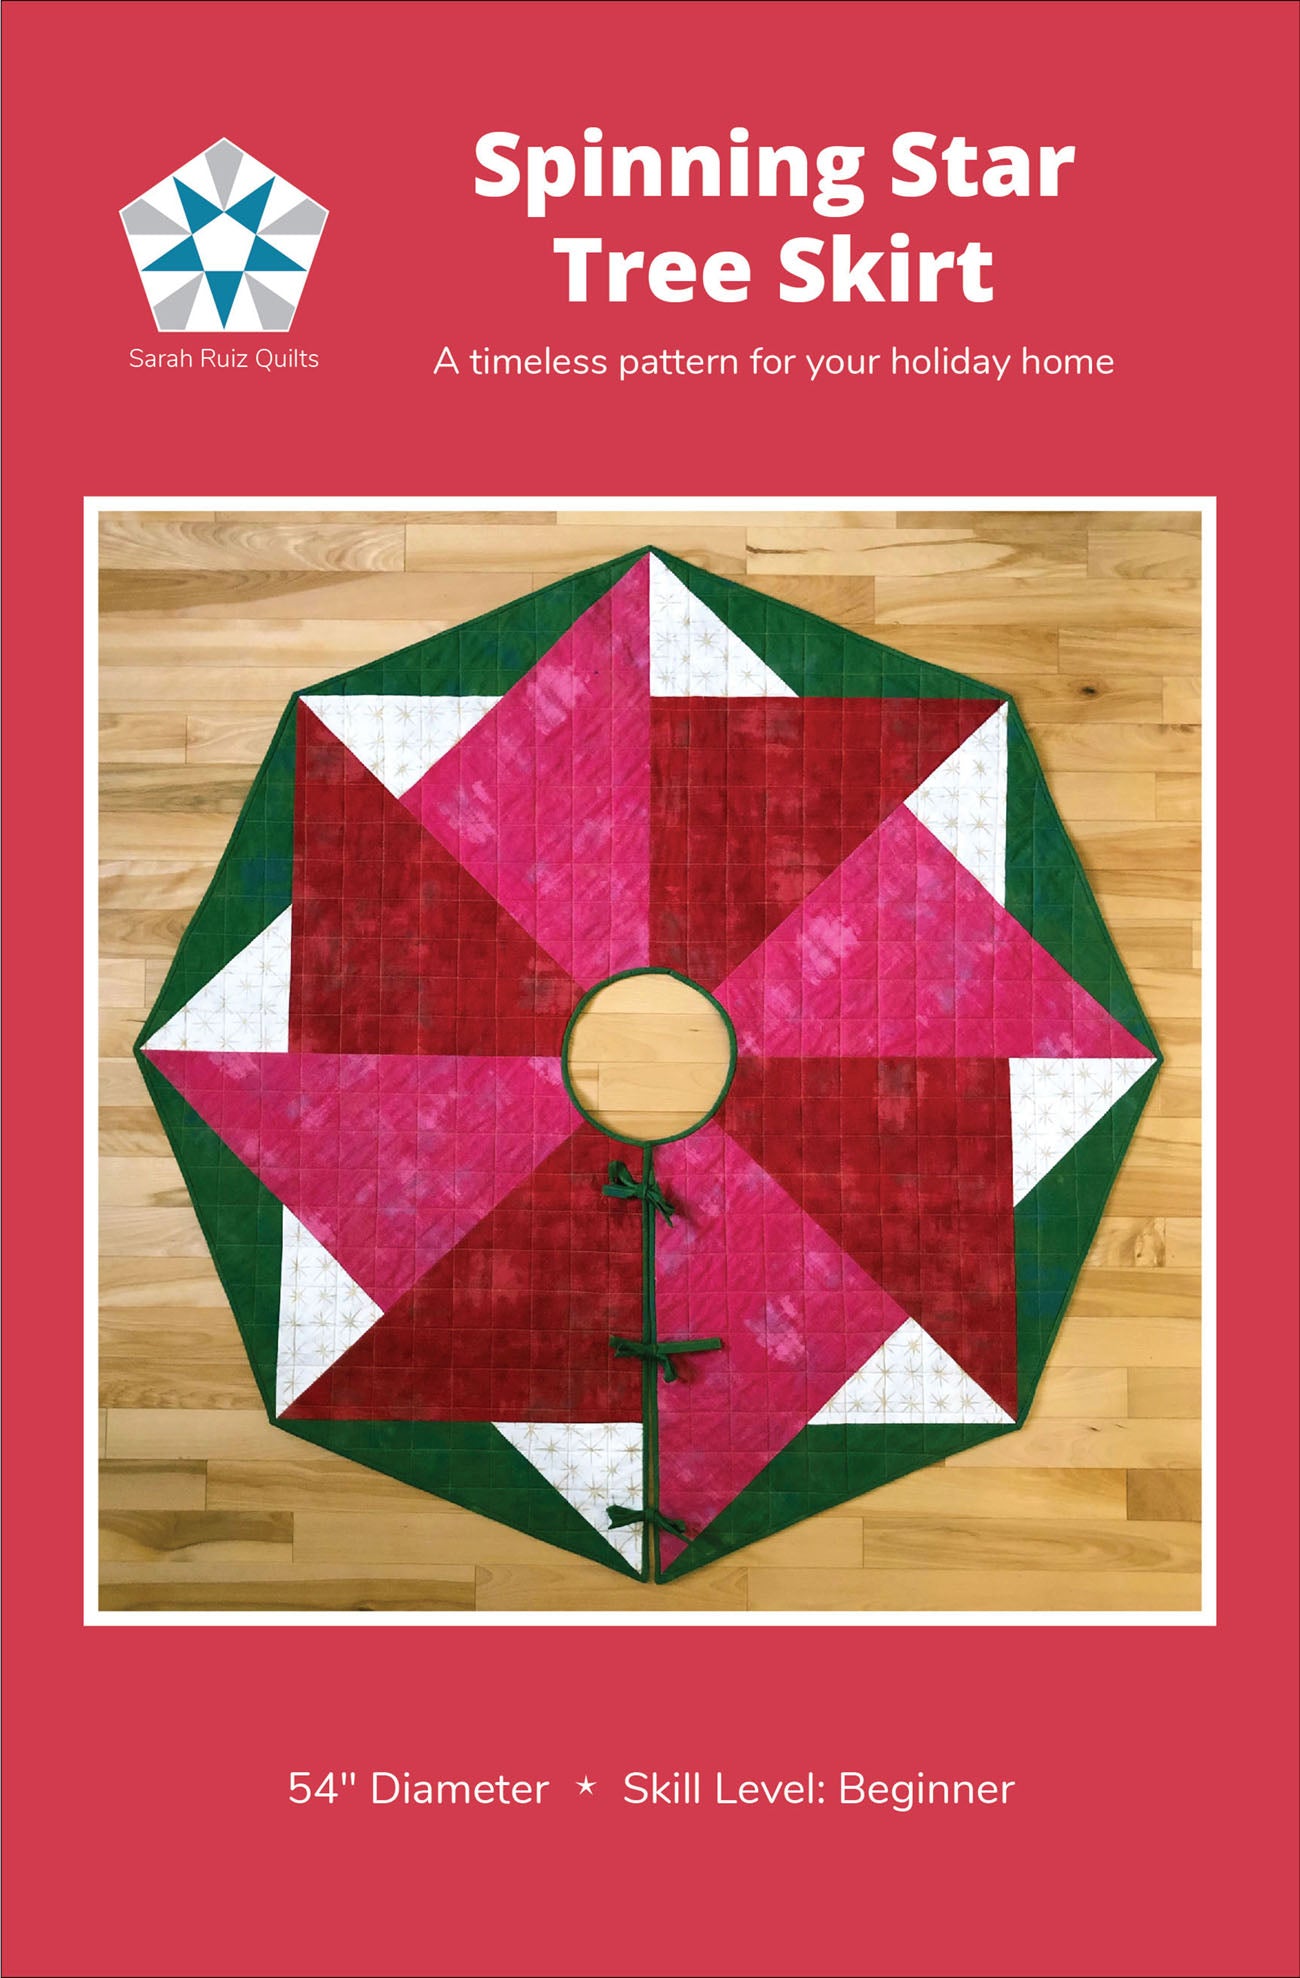 Spinning Star Tree Skirt Sewing Pattern by Sarah Ruiz Quilts